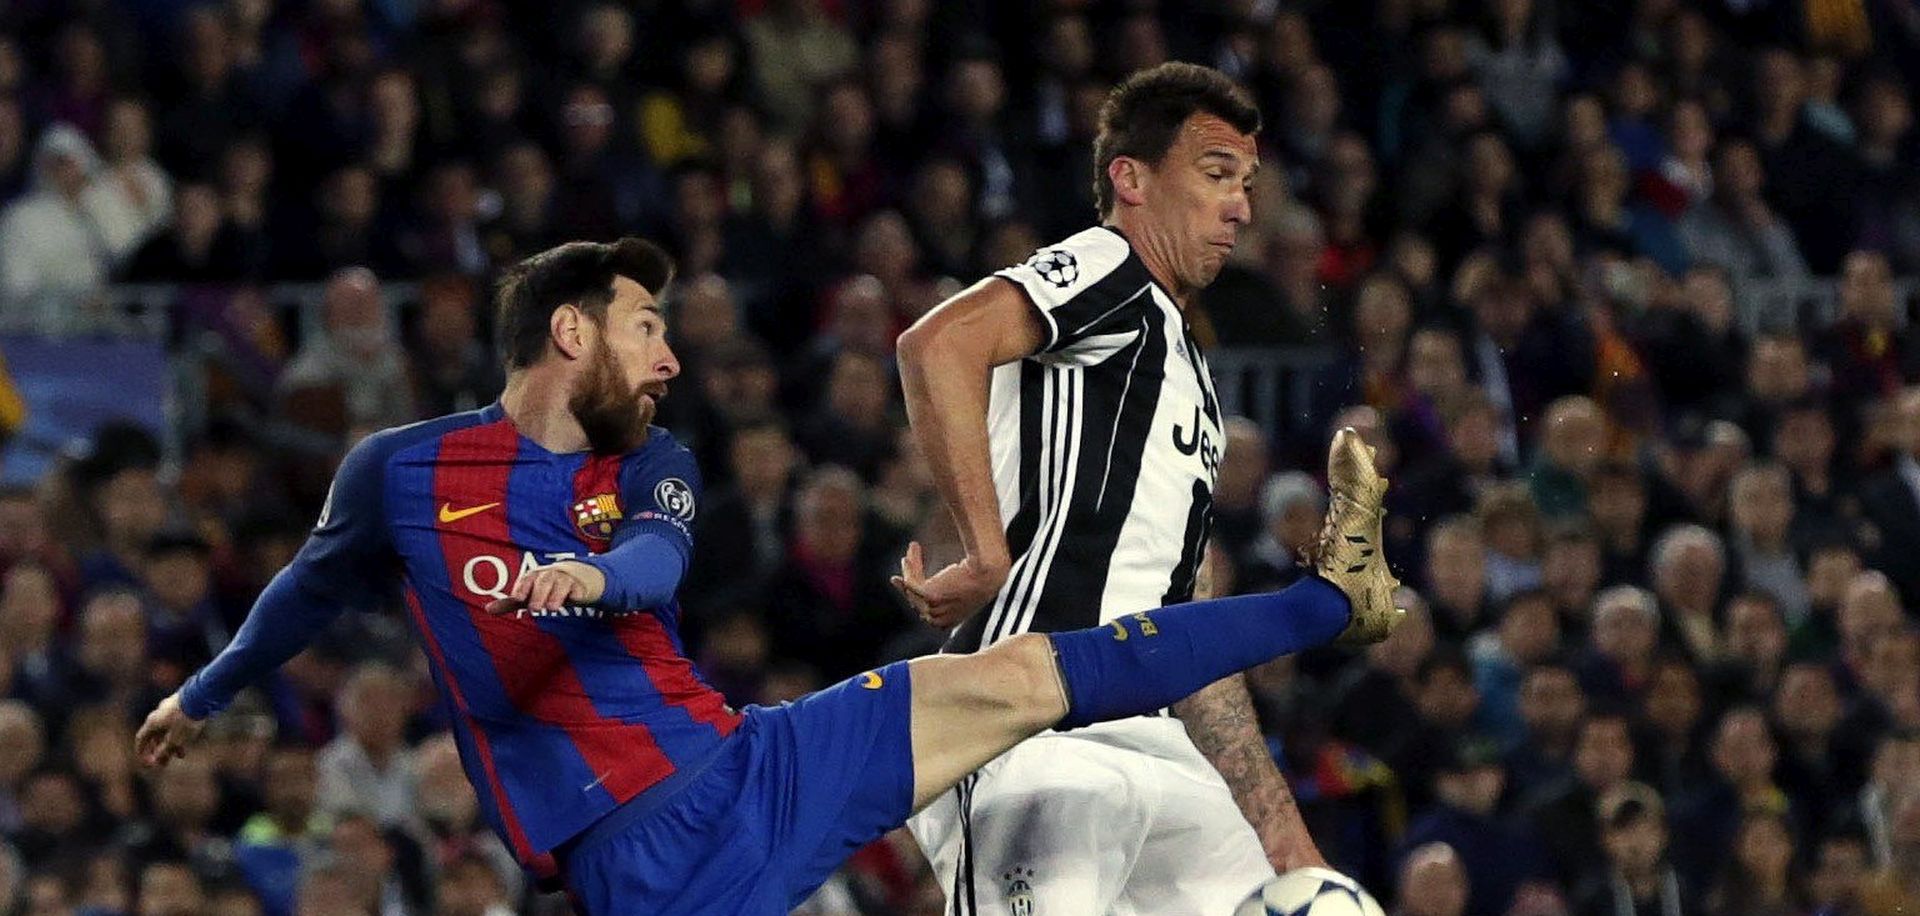 epa05915759 FC Barcelona's Lionel Messi (L) fights for the ball with Mario Mandzukic (R) of Juventus during the UEFA Champions League quarter final, second leg soccer match between FC Barcelona and Juventus FC at Camp Nou stadium in Barcelona, Spain, 19 April 2017.  EPA/ALBERTO ESTEVEZ